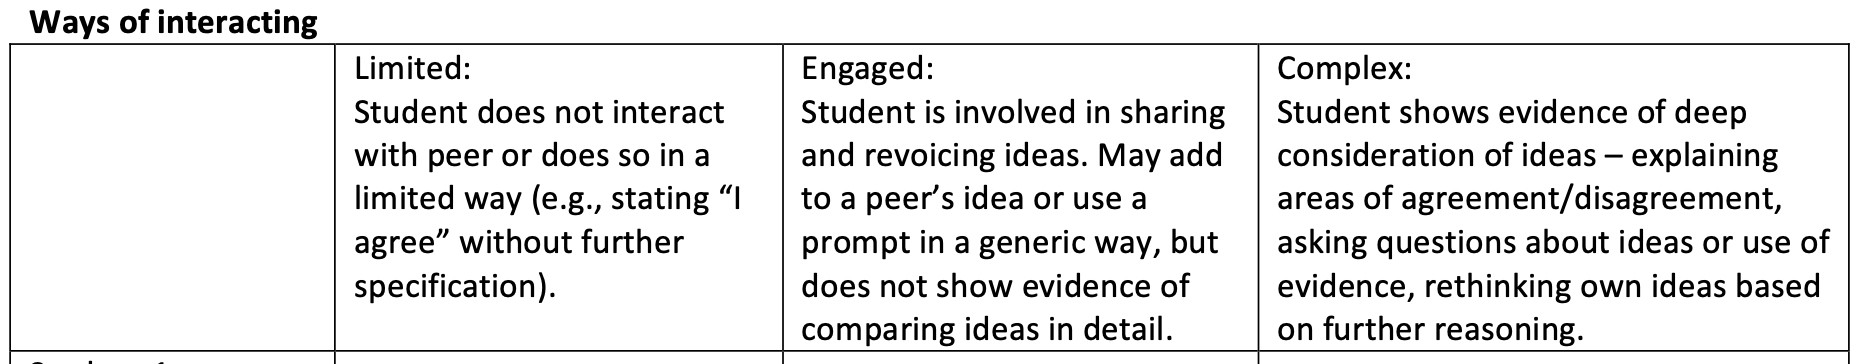 Ways of interacting: Limited: Student does not interact with peer or does so in a limited way (e.g., stating "I agree" without further specification). Engaged: Student is involved in sharing and revoicing ideas. May add to a peer's idea or use a prompt in a generic way, but does not show evidence of comparing ideas in detail. Complex: Student shows evidence of deep consideration of ideas - explaining areas of agreement/disagreement, asking questions about ideas or use of evidence, rethinking own ideas based on further reasoning.